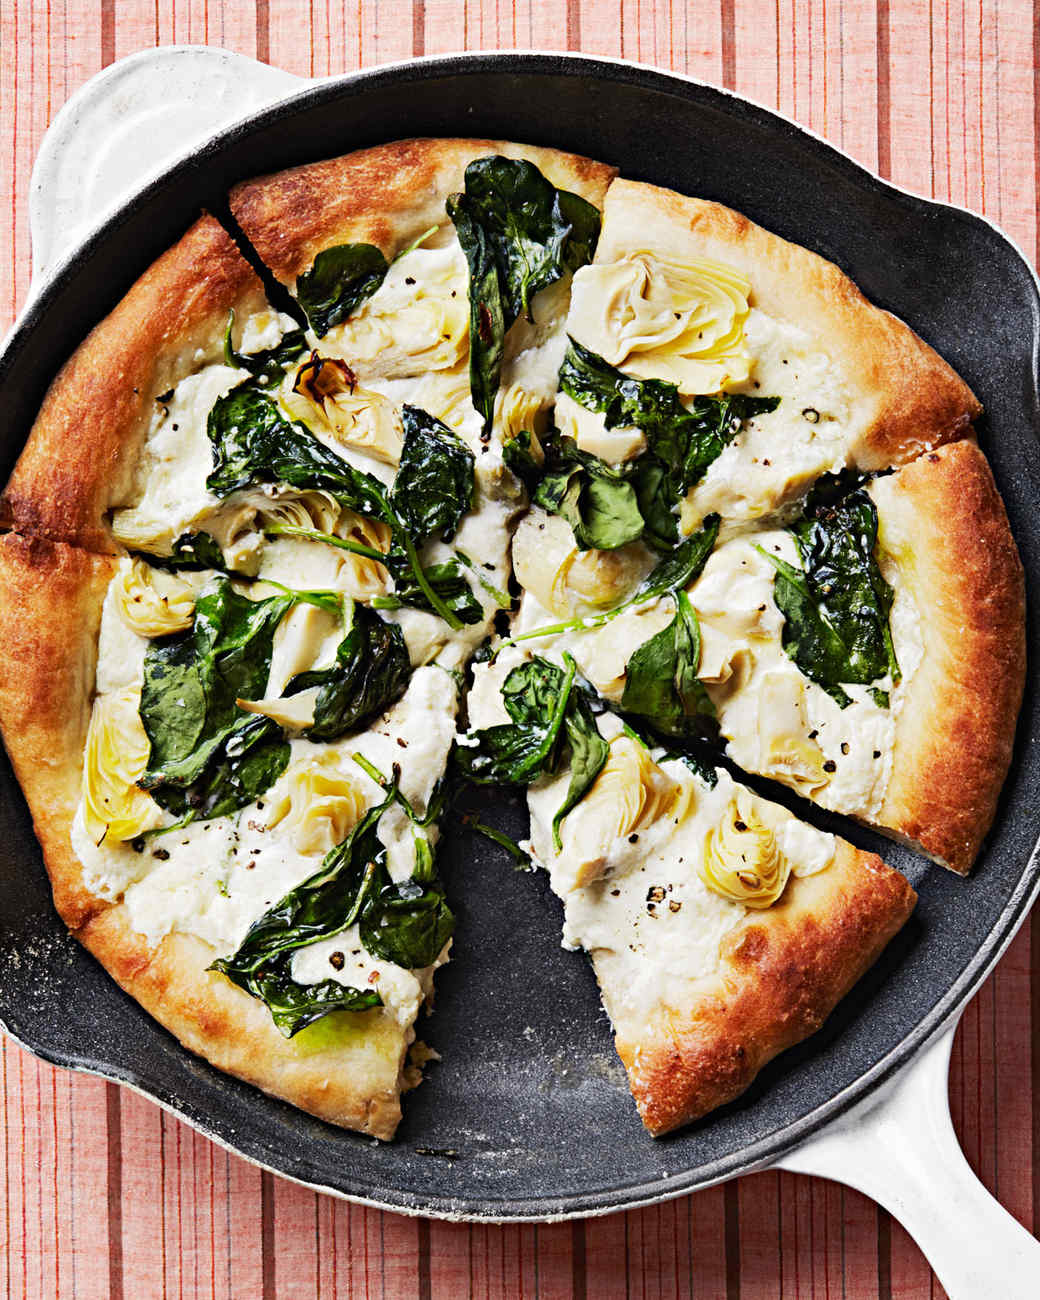 Artichoke-and-spinach-skillet-pizza-102817879_vert